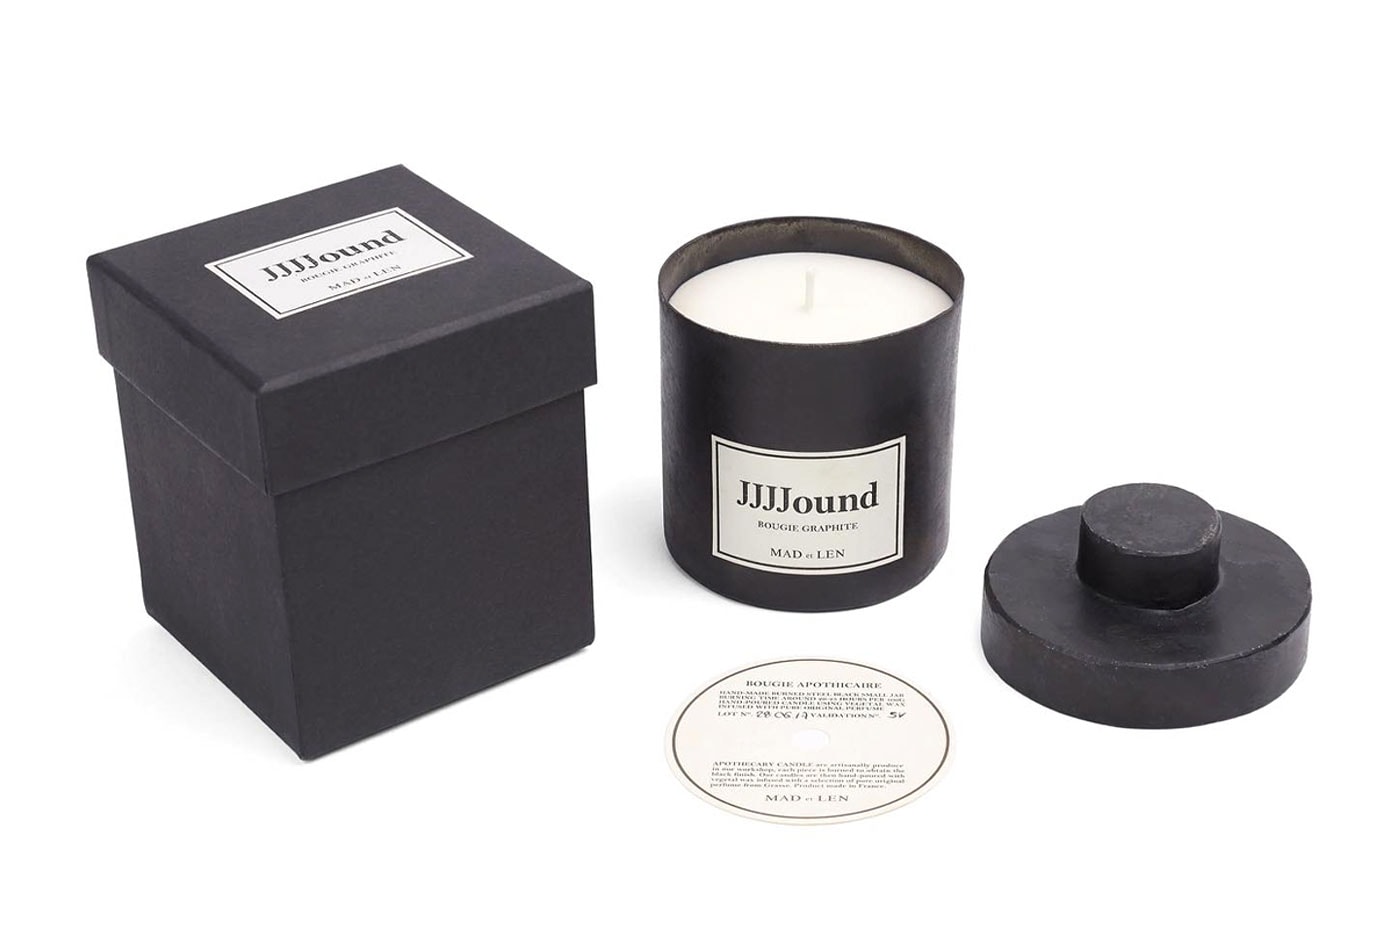 JJJJound Mad et Len Graphite Candle aromatherapy perfume plant based wax french alps black release info date price